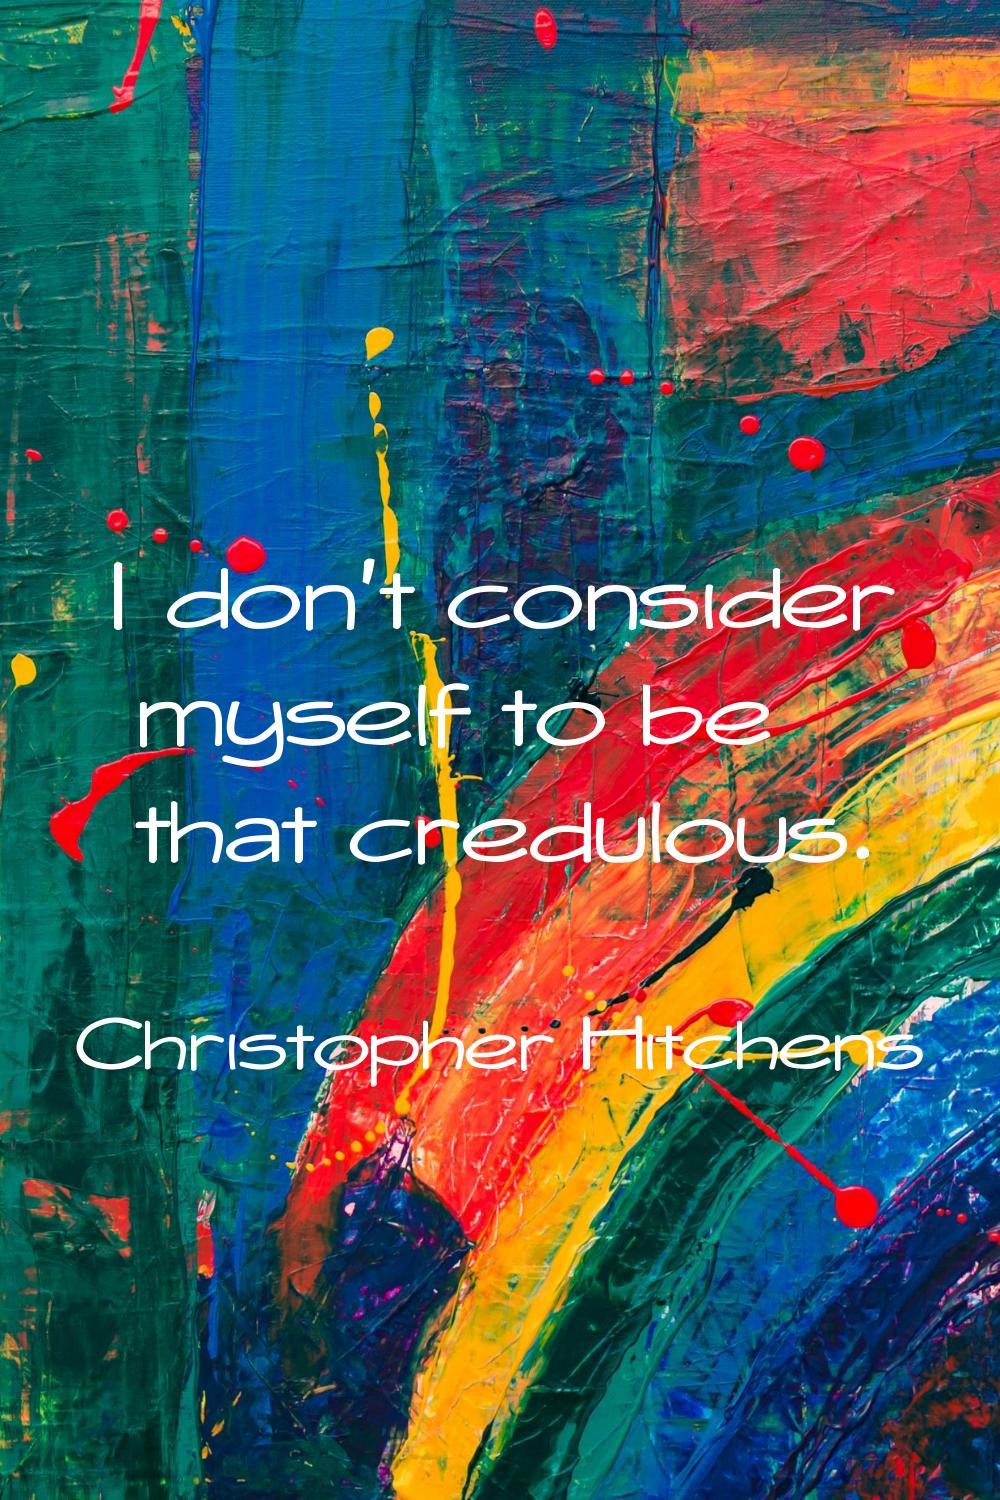 I don't consider myself to be that credulous.